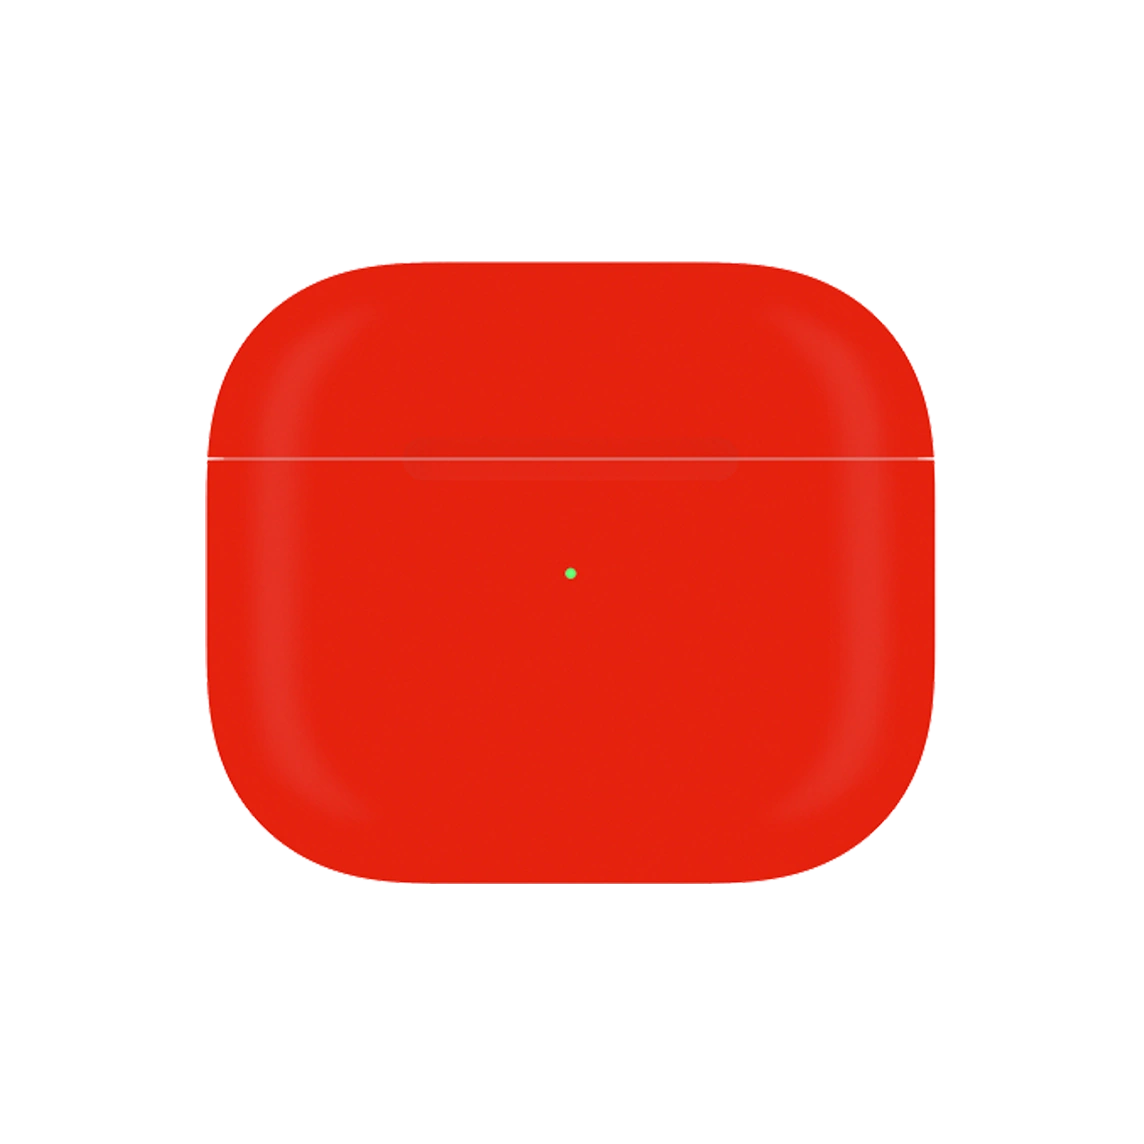 switch-painted-apple-airpods-3-ferrari-red-matte